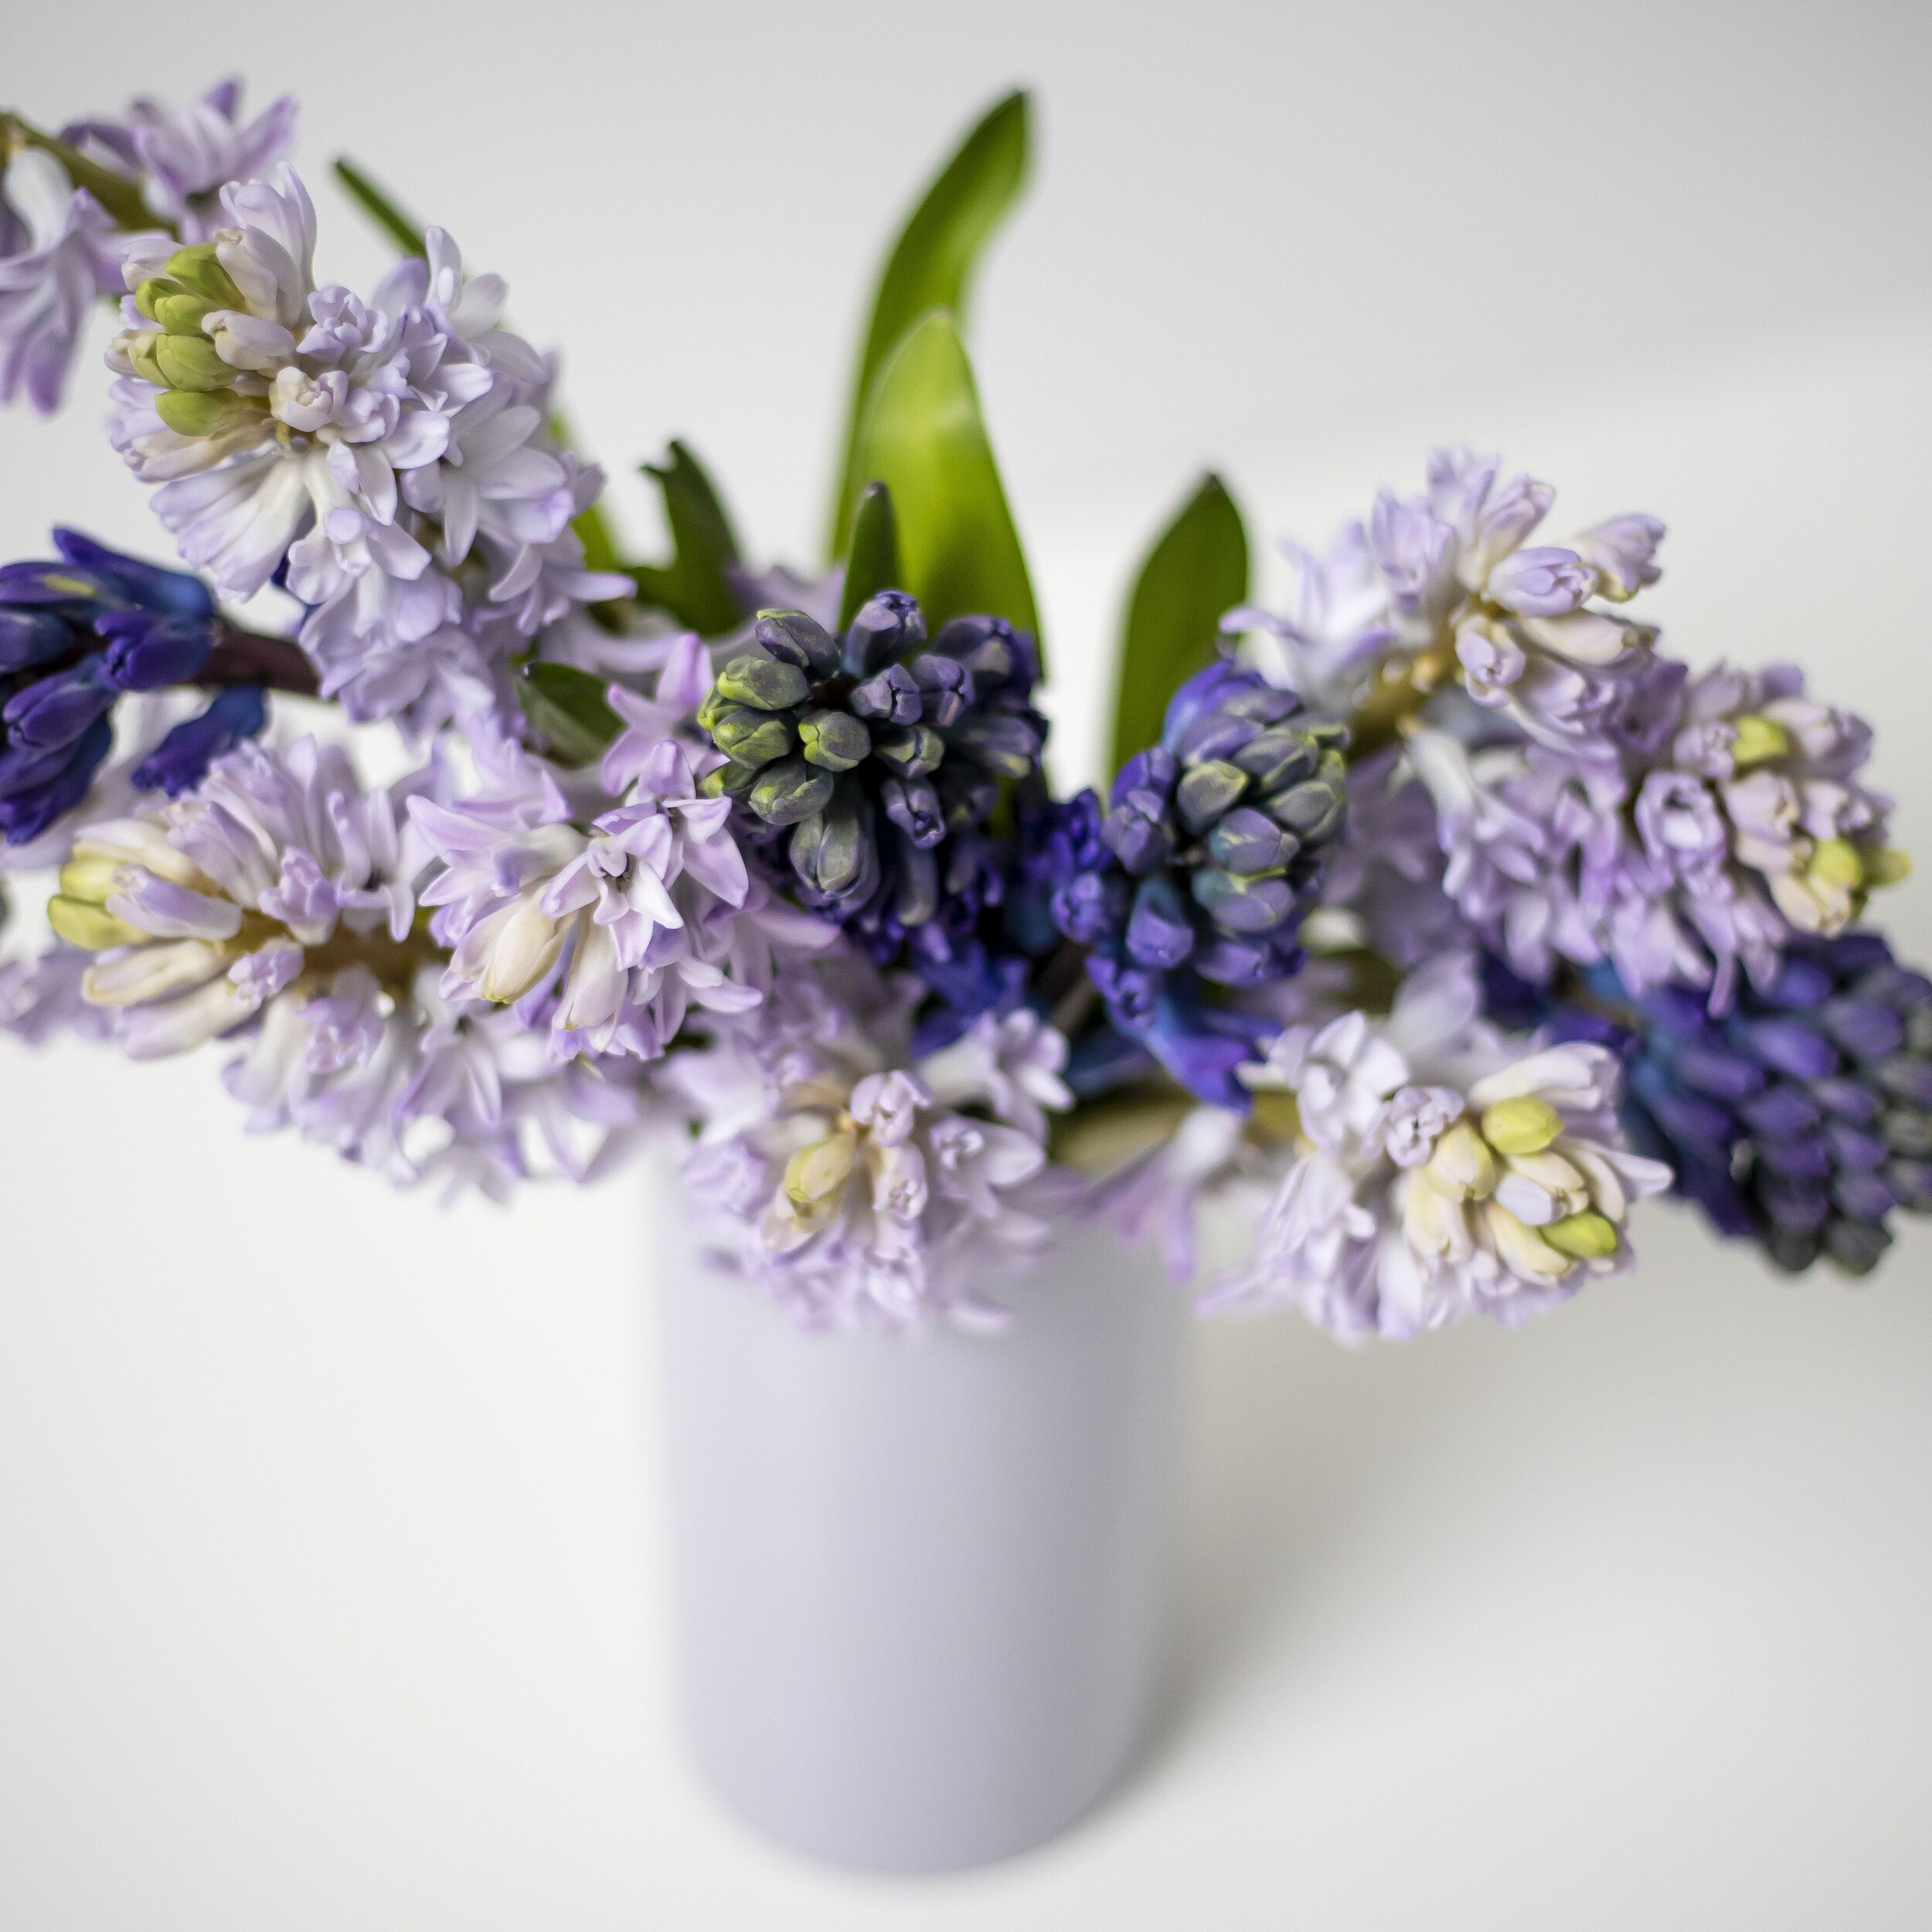 A close up of purple Hyacinth stems in a lavender colored vase